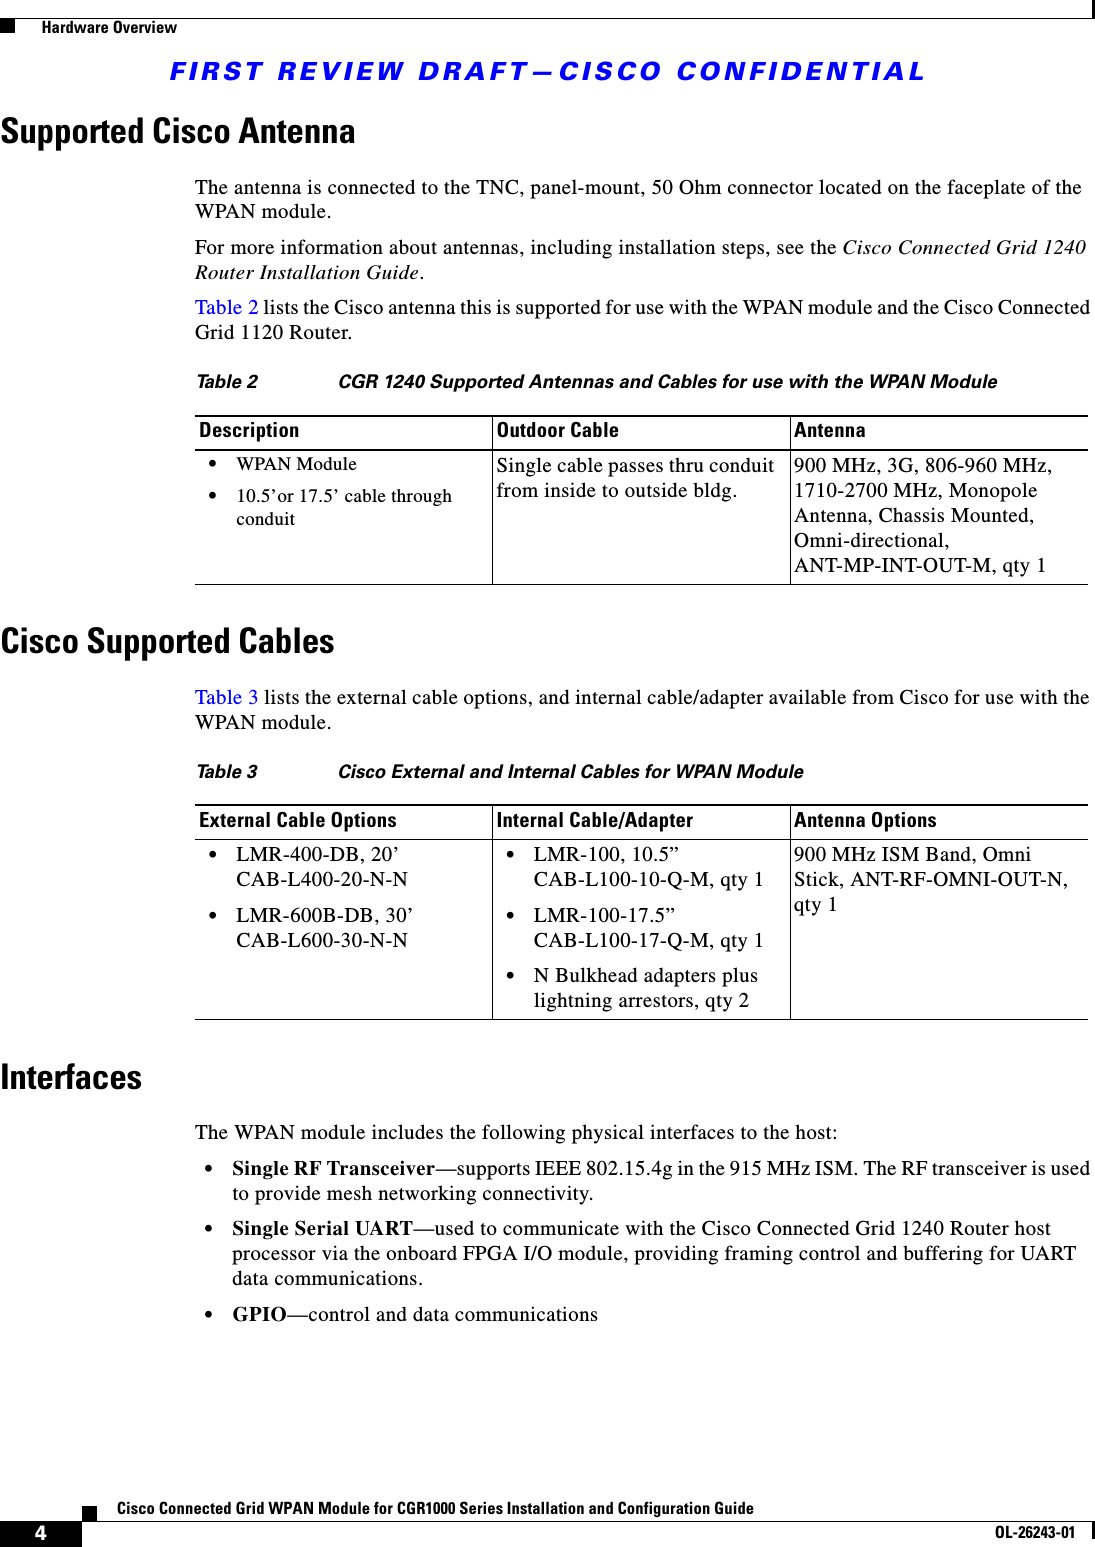 FIRST REVIEW DRAFT—CISCO CONFIDENTIAL4Cisco Connected Grid WPAN Module for CGR1000 Series Installation and Configuration GuideOL-26243-01  Hardware OverviewSupported Cisco AntennaThe antenna is connected to the TNC, panel-mount, 50 Ohm connector located on the faceplate of the WPAN module. For more information about antennas, including installation steps, see the Cisco Connected Grid 1240 Router Installation Guide.Table 2 lists the Cisco antenna this is supported for use with the WPAN module and the Cisco Connected Grid 1120 Router.Cisco Supported CablesTable 3 lists the external cable options, and internal cable/adapter available from Cisco for use with the WPAN module.InterfacesThe WPAN module includes the following physical interfaces to the host: • Single RF Transceiver—supports IEEE 802.15.4g in the 915 MHz ISM. The RF transceiver is used to provide mesh networking connectivity. • Single Serial UART—used to communicate with the Cisco Connected Grid 1240 Router host processor via the onboard FPGA I/O module, providing framing control and buffering for UART data communications.  • GPIO—control and data communicationsTa b l e  2 CGR 1240 Supported Antennas and Cables for use with the WPAN ModuleDescription Outdoor Cable Antenna • WPAN Module  • 10.5’or 17.5’ cable through conduitSingle cable passes thru conduit from inside to outside bldg. 900 MHz, 3G, 806-960 MHz, 1710-2700 MHz, Monopole Antenna, Chassis Mounted, Omni-directional, ANT-MP-INT-OUT-M, qty 1Table 3 Cisco External and Internal Cables for WPAN ModuleExternal Cable Options Internal Cable/Adapter Antenna Options  • LMR-400-DB, 20’ CAB-L400-20-N-N  • LMR-600B-DB, 30’ CAB-L600-30-N-N  • LMR-100, 10.5” CAB-L100-10-Q-M, qty 1  • LMR-100-17.5” CAB-L100-17-Q-M, qty 1  • N Bulkhead adapters plus lightning arrestors, qty 2900 MHz ISM Band, Omni Stick, ANT-RF-OMNI-OUT-N, qty 1